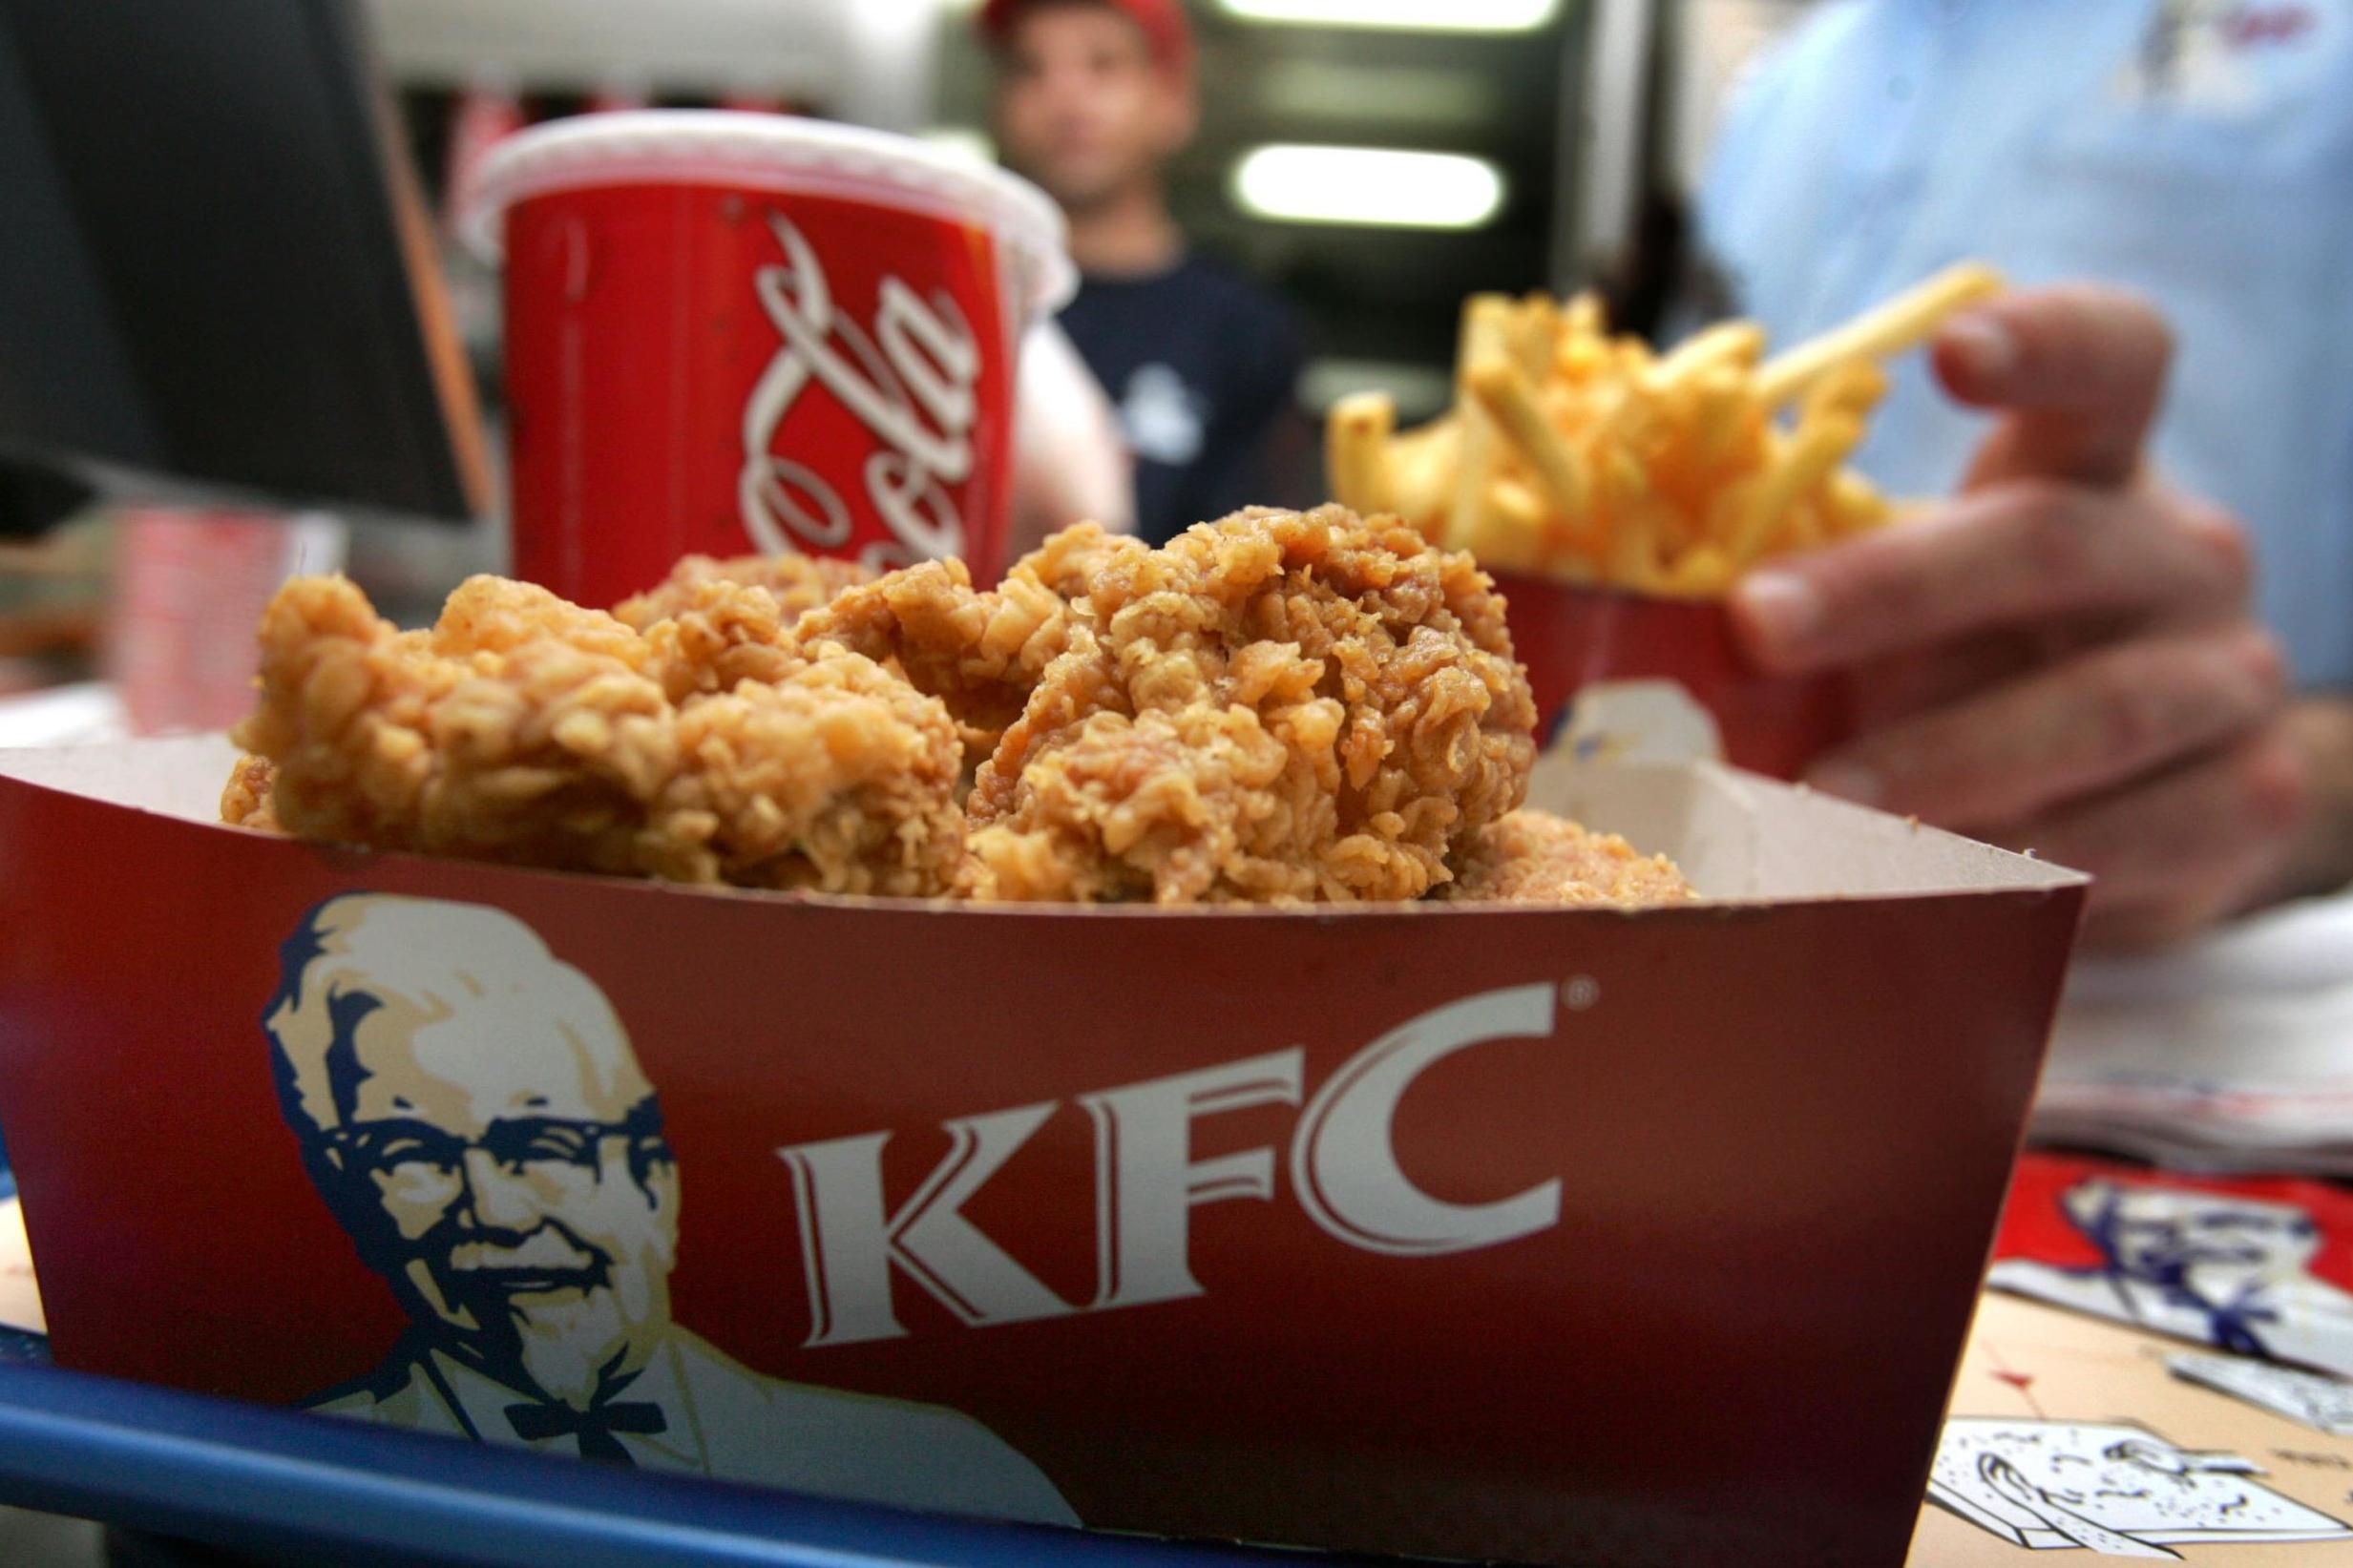 One condemned man, a former KFC manager, asked for a bucket of fried chicken